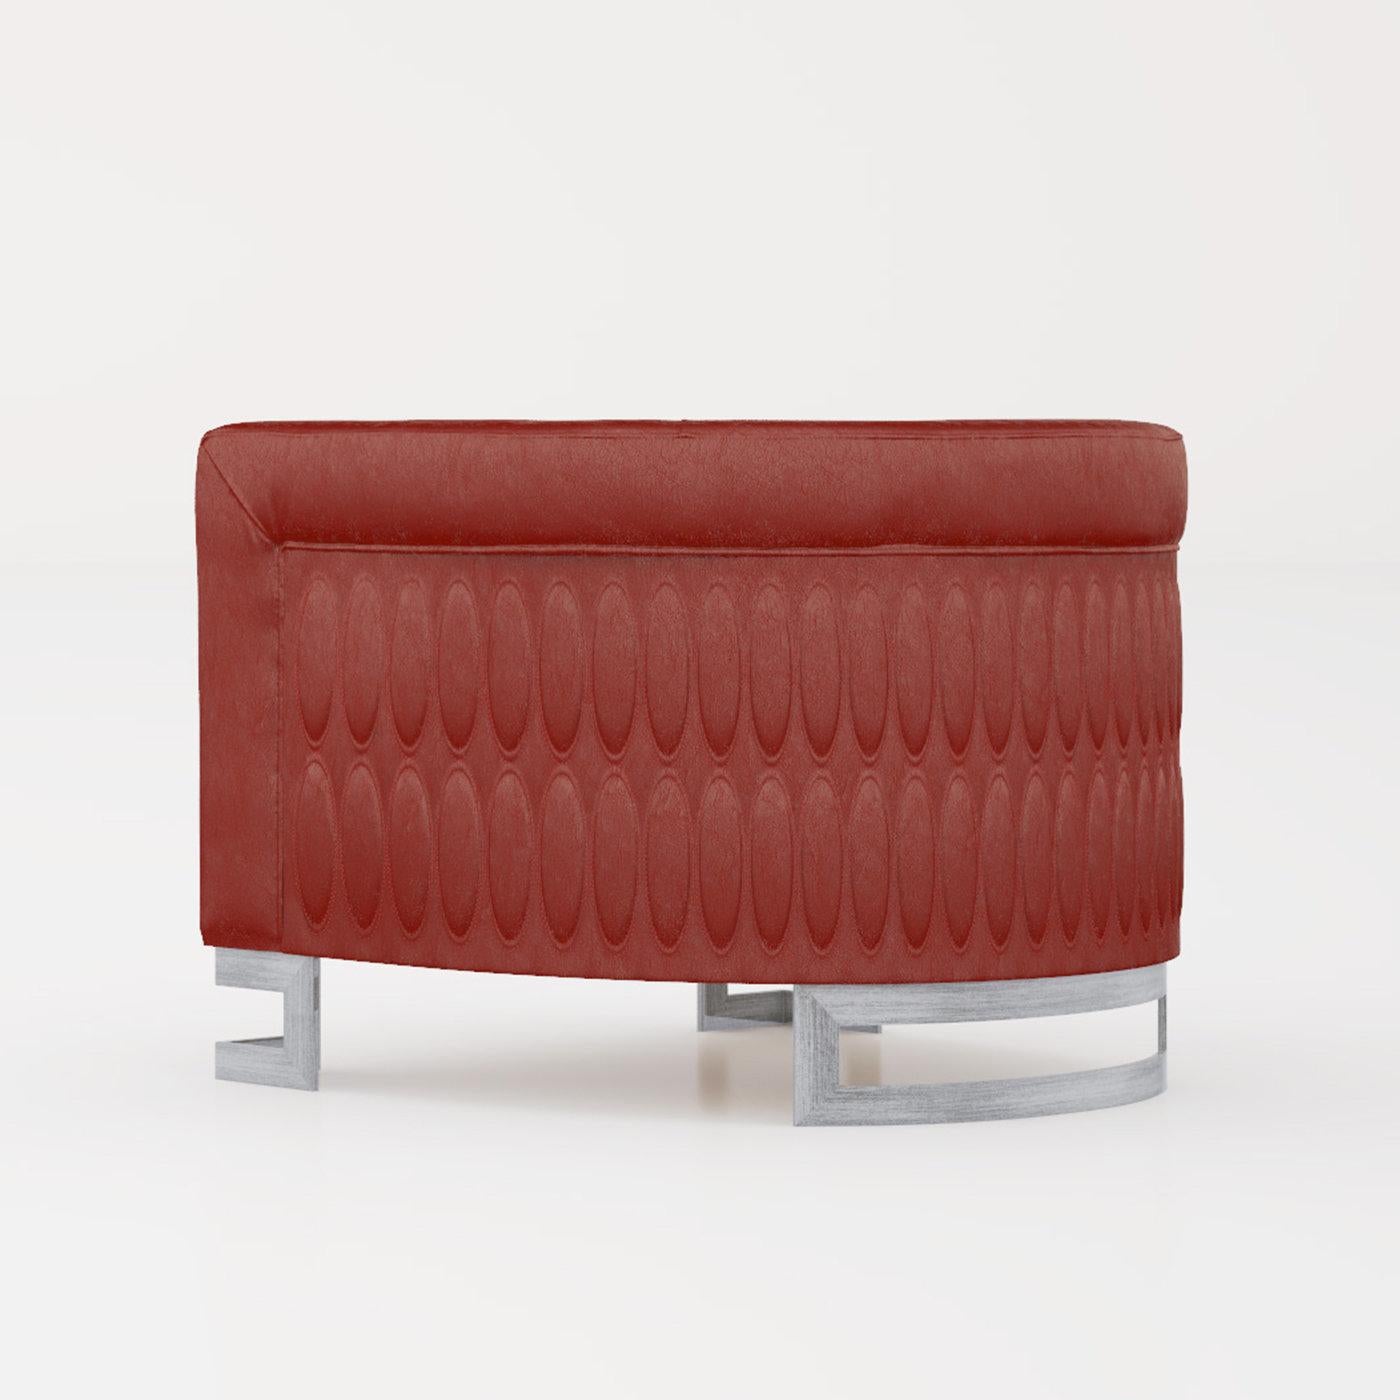 The Zaffiro red armchair makes a luxurious addition to any contemporary living space. Its solid poplar and spruce frame is fully upholstered in smooth red leather, paired with polished brushed nickel feet. Finished with oval quilting on the sides as